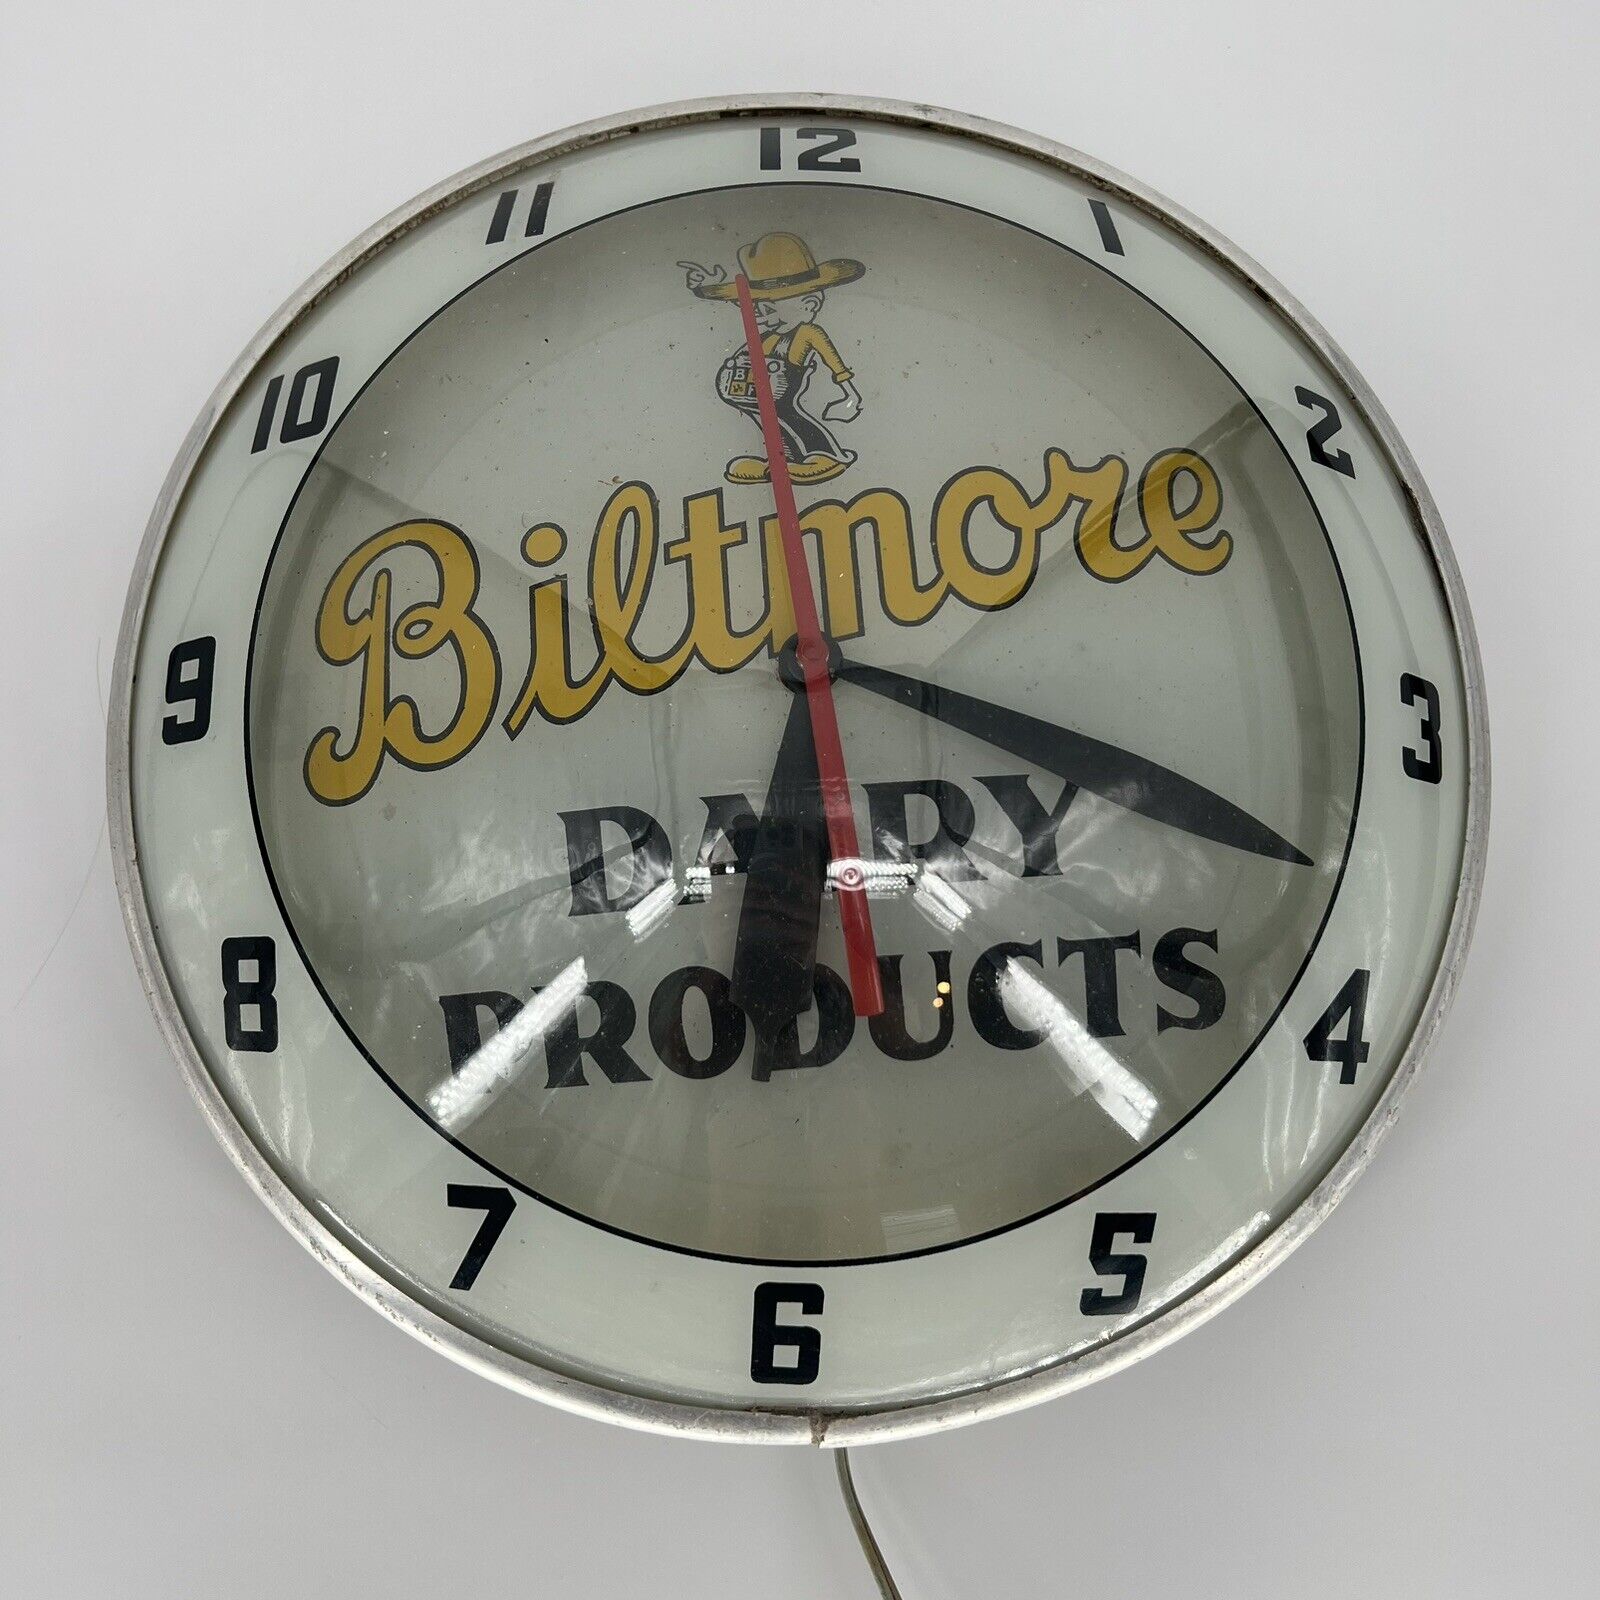 Biltmore Dairy Products Bubble Light Advertising Clock Tested & Working Rare 